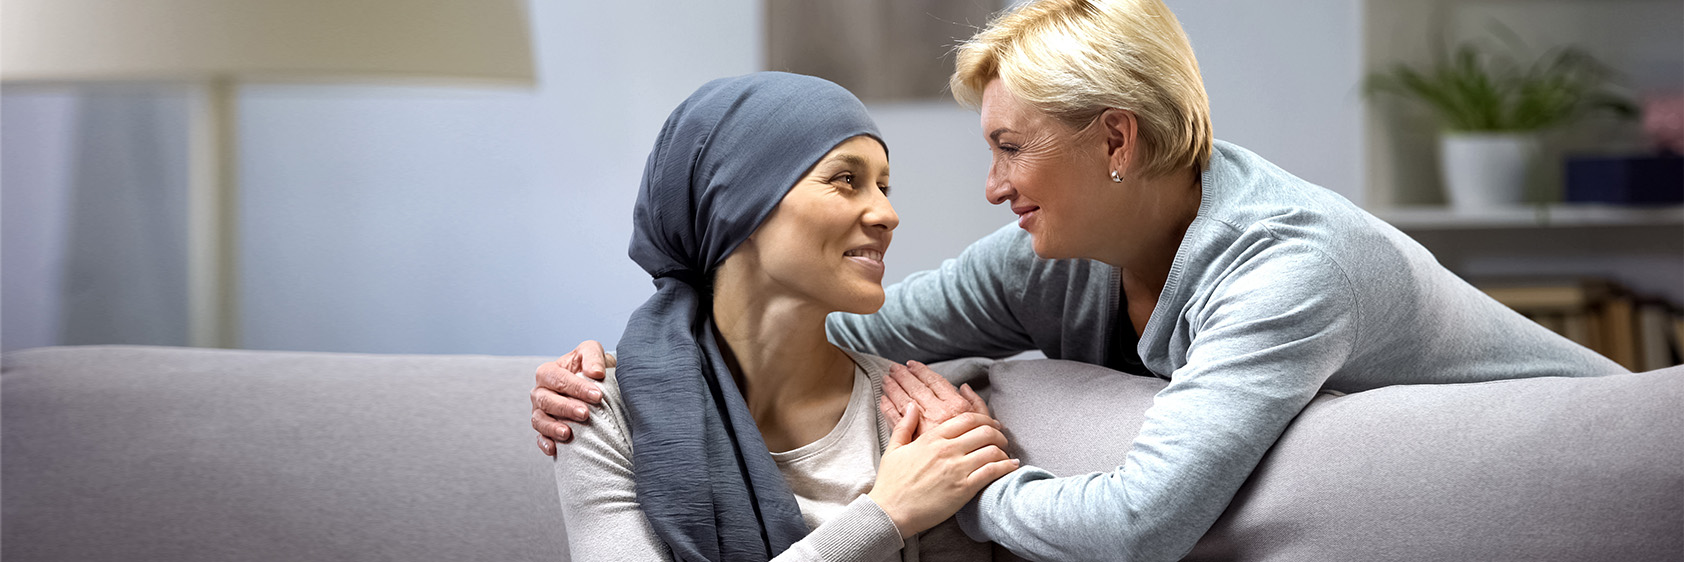 Woman consoling woman, cancer patient in head scarf 